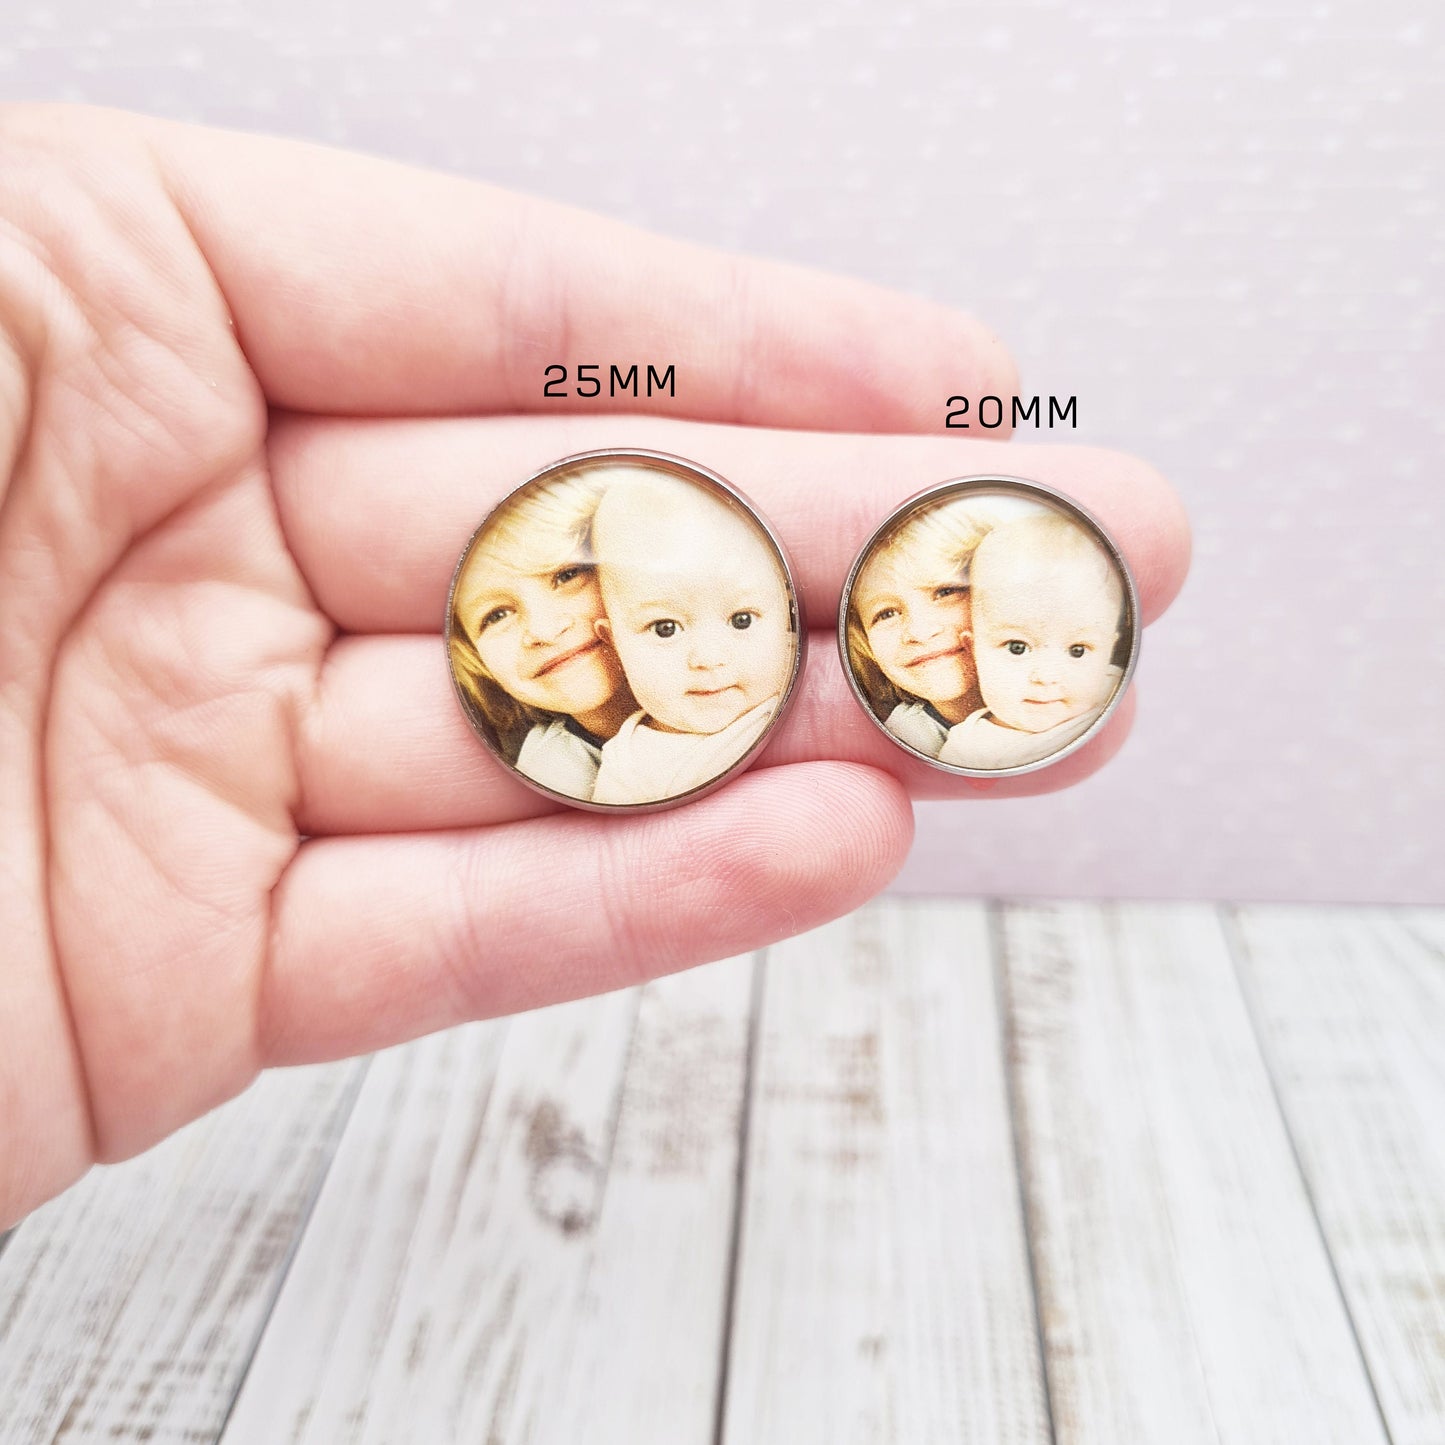 2 sizes of lapel pin with personalised photos held in-between fingers